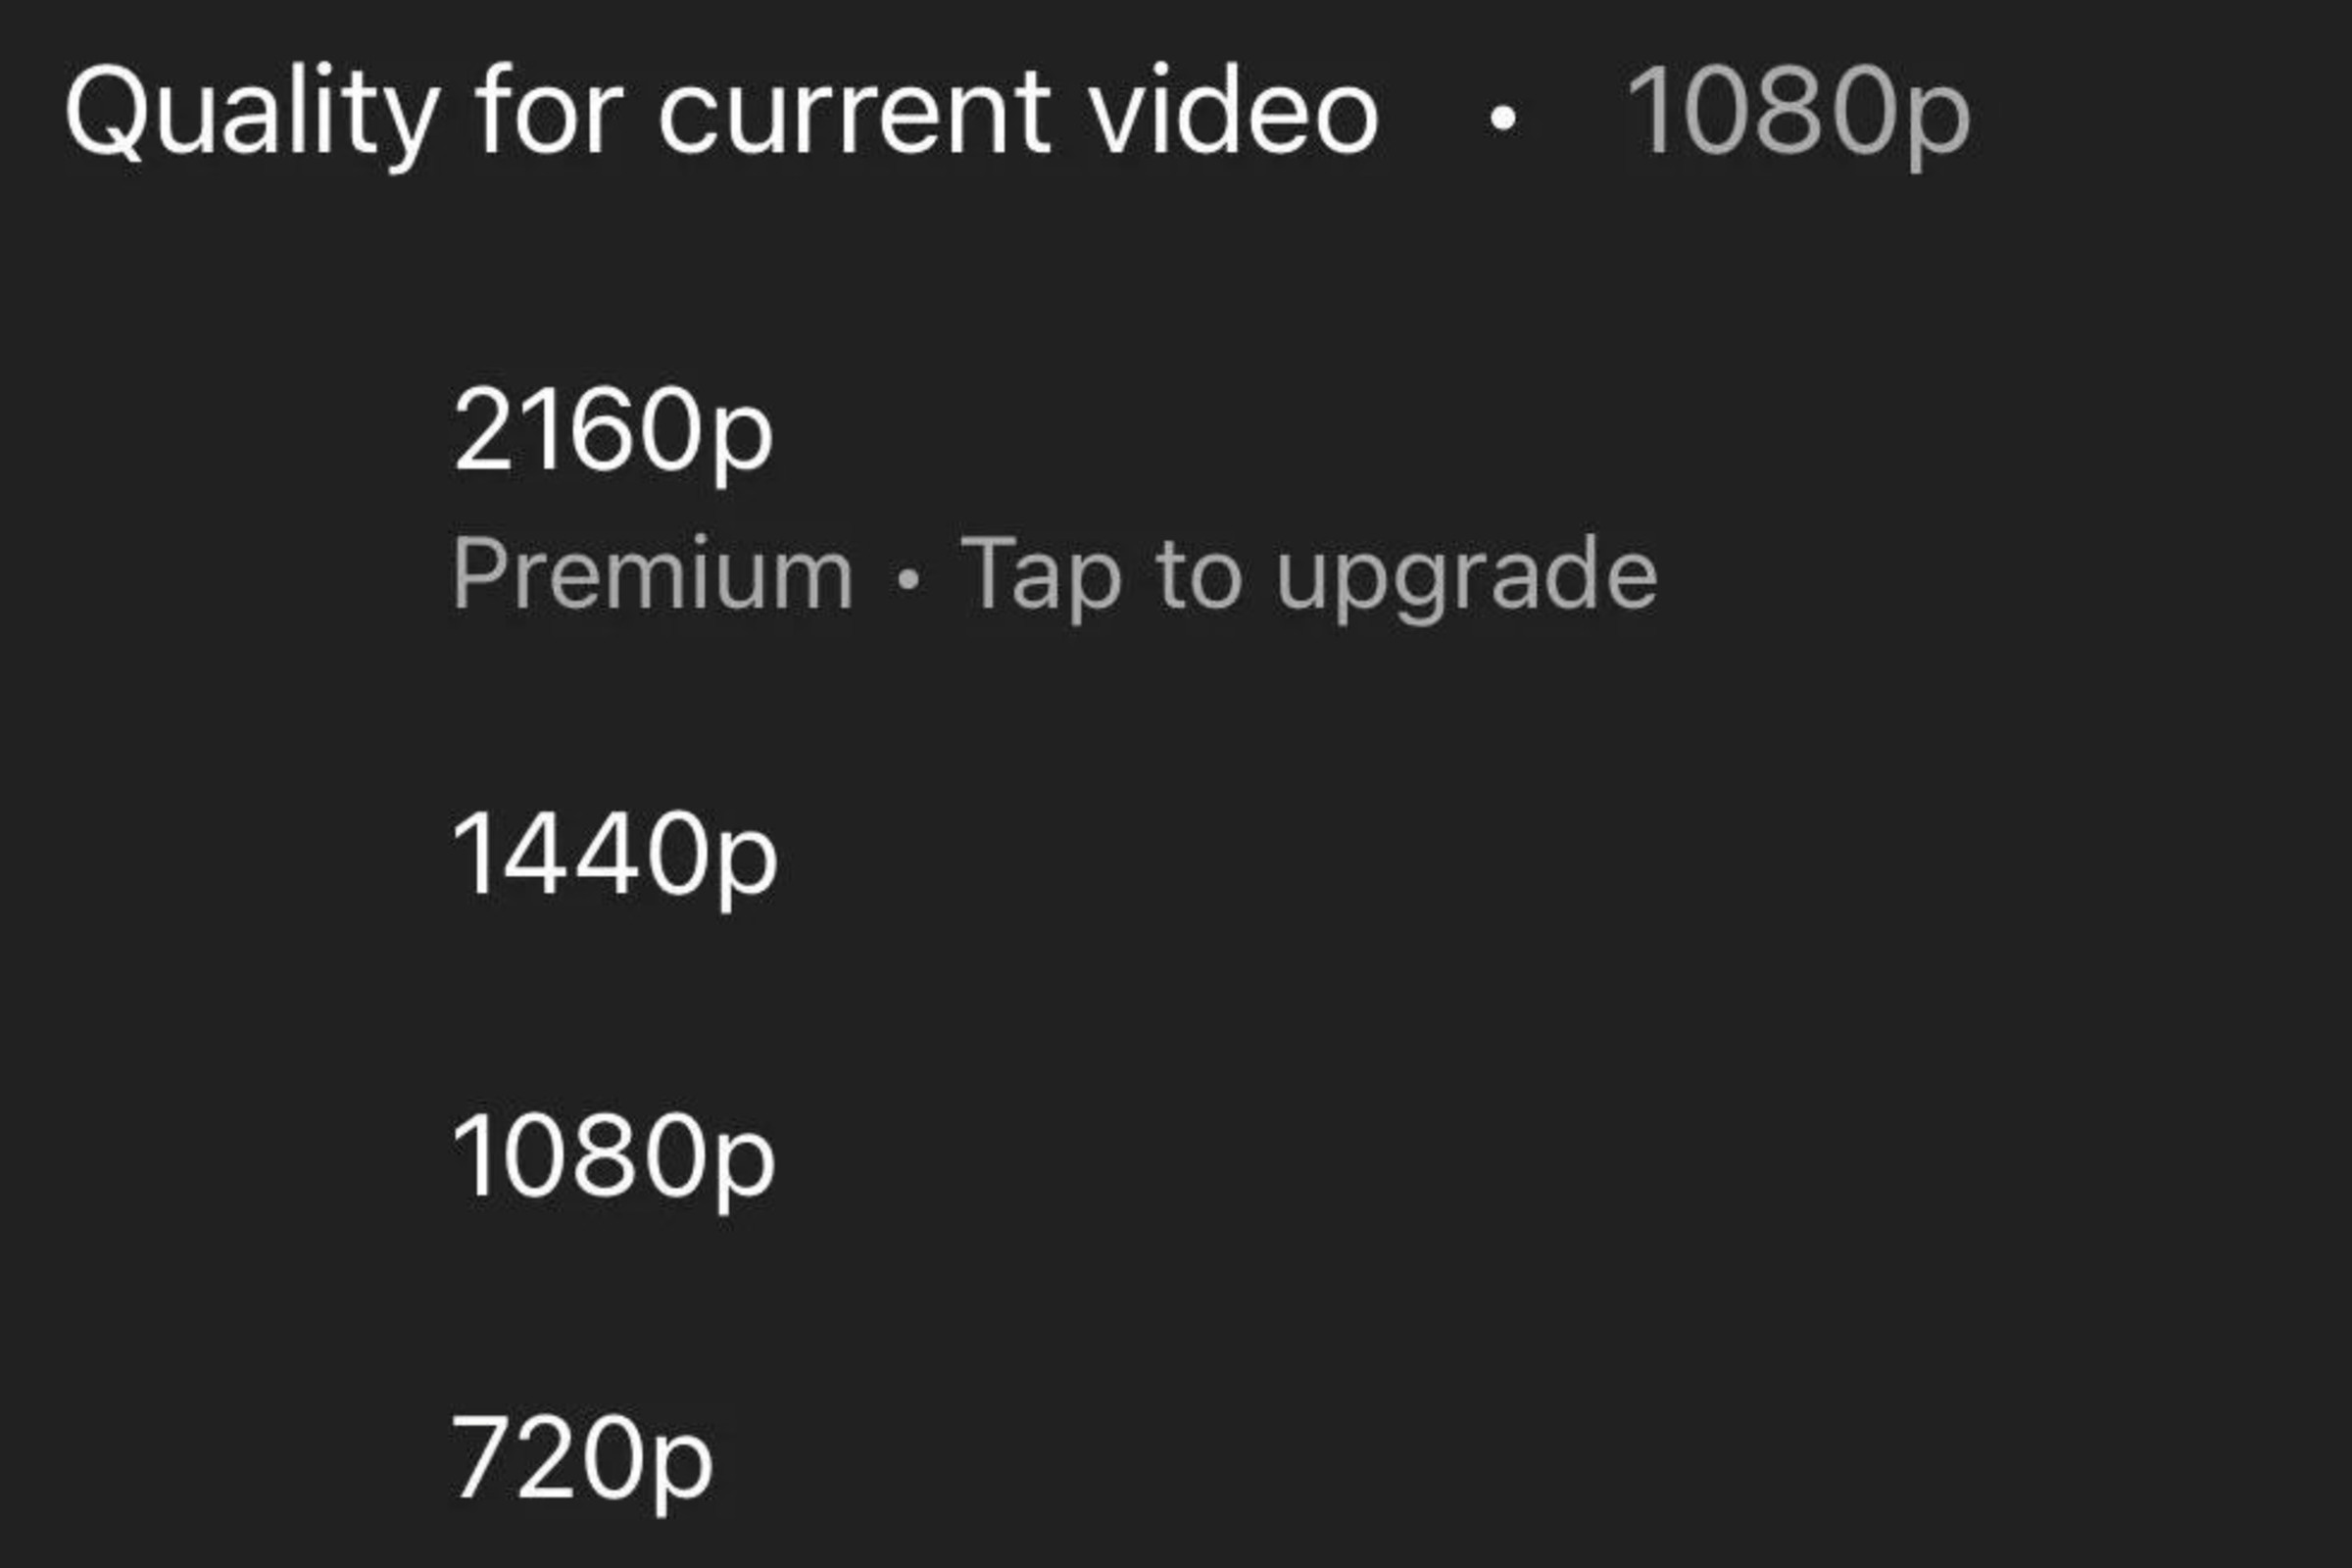 A YouTube video settings box displaying 4K resolution as a premium feature